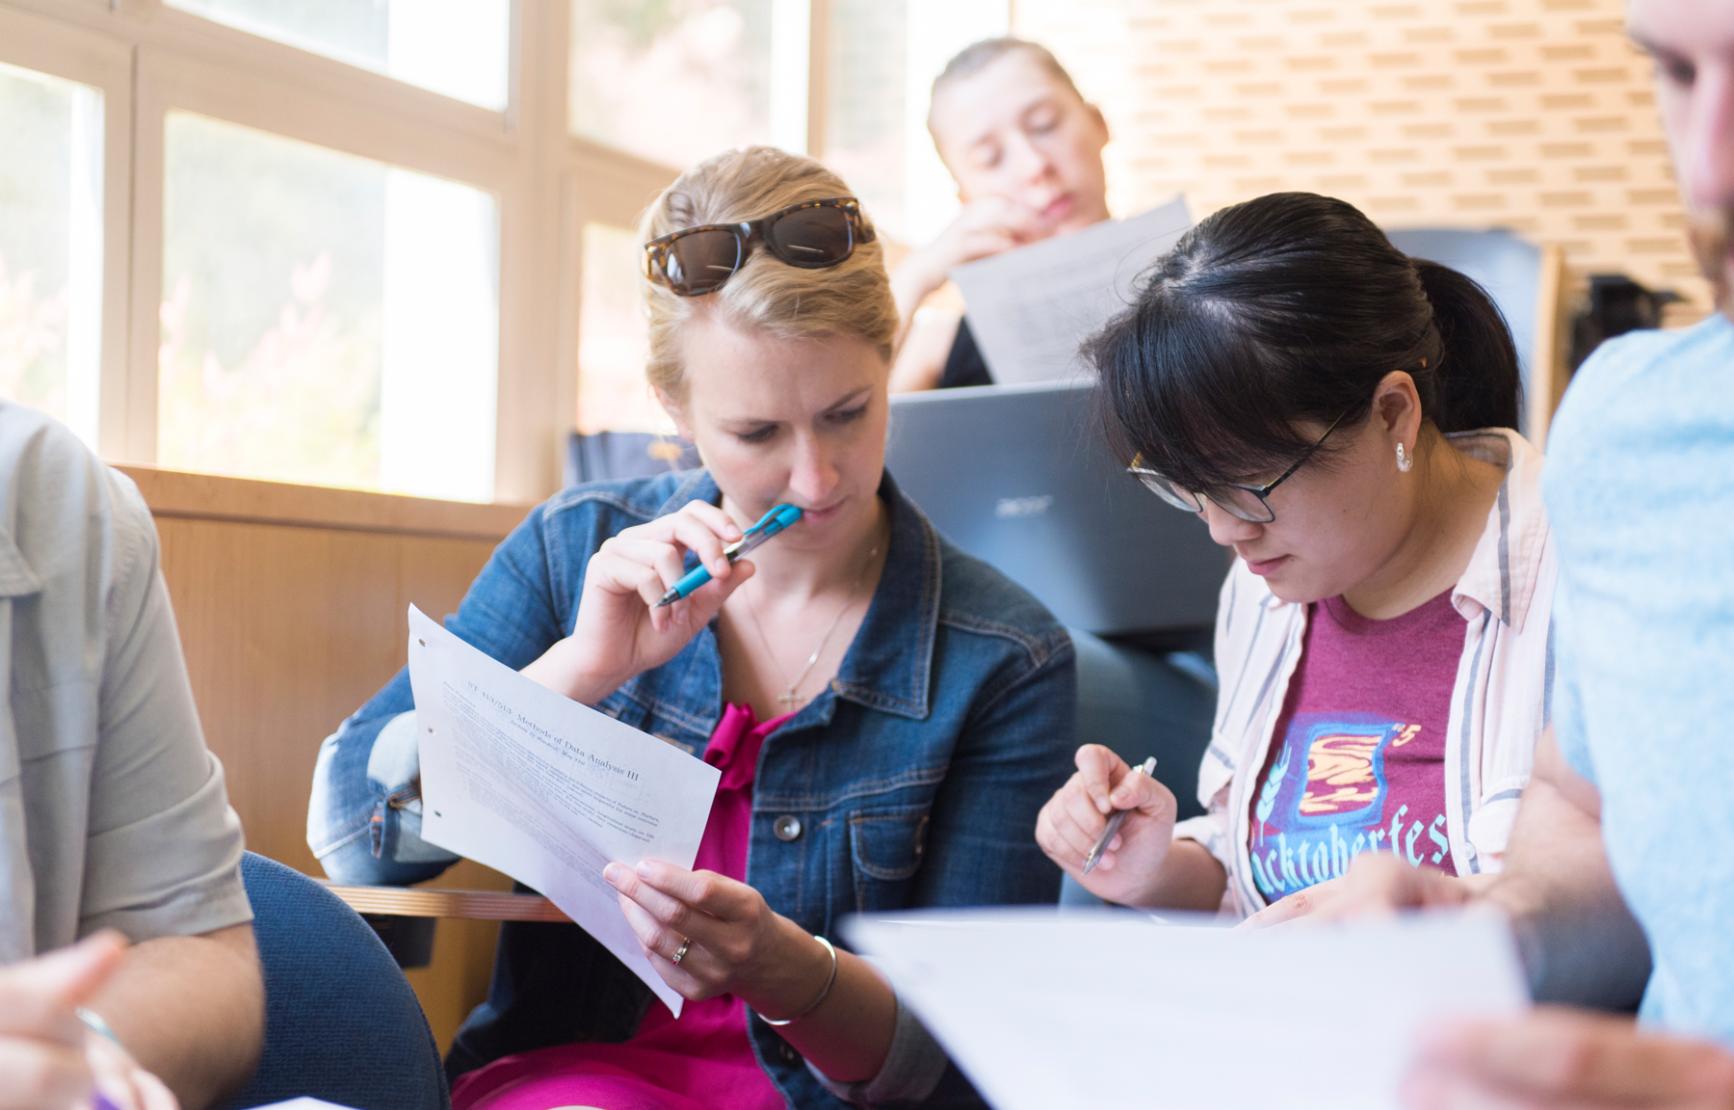 Two women students work together in a sunny statistics classroom